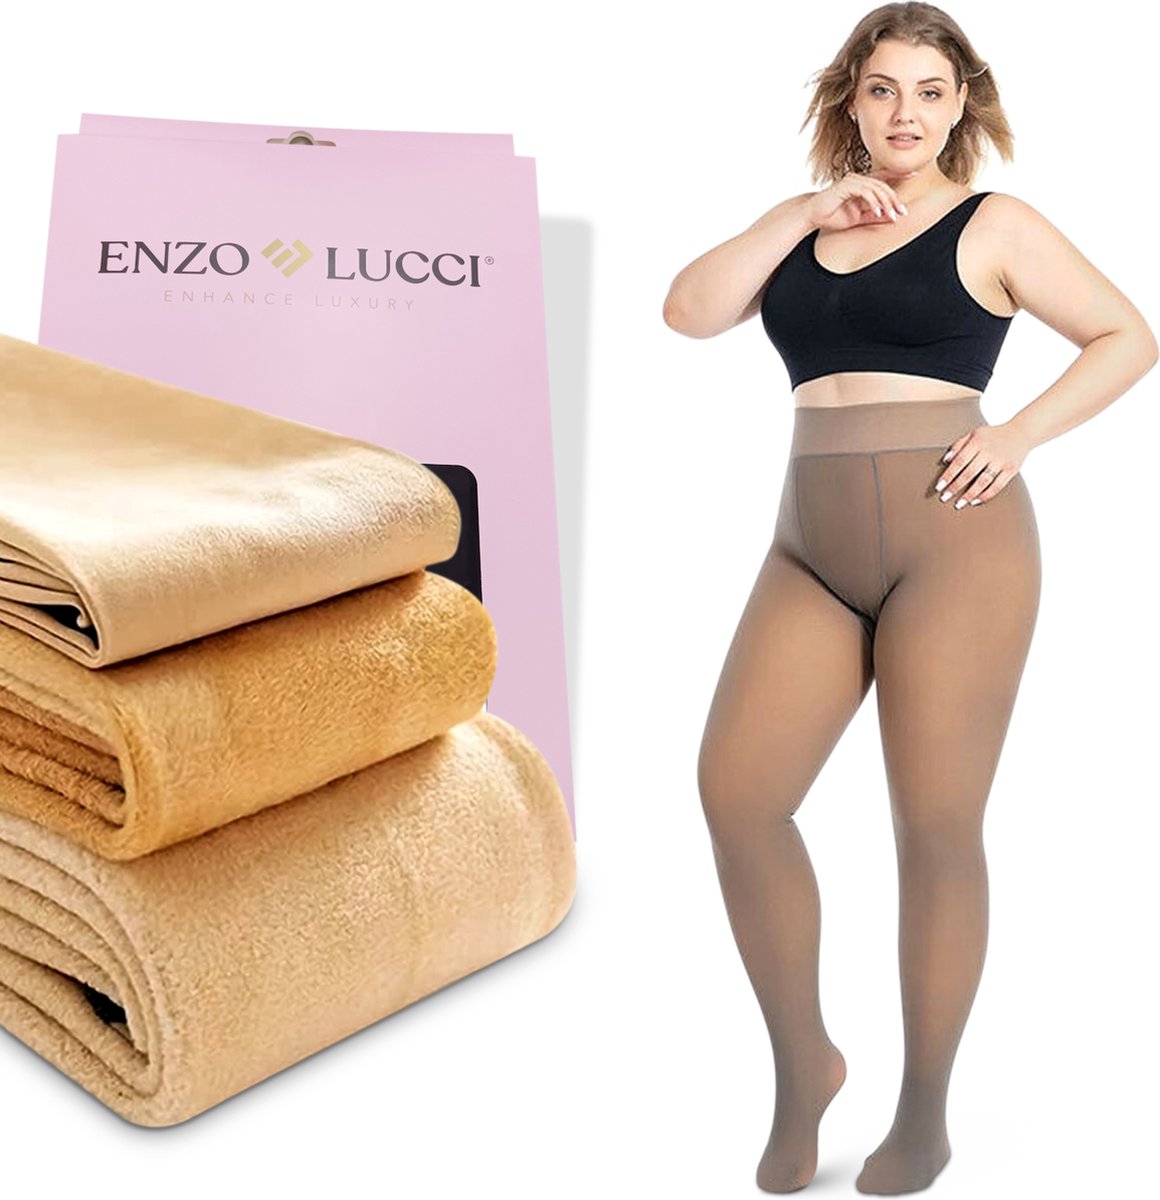 Enzo Lucci Fleece Panty voor Dames - Thermo Legging Panty’s - Plus Size Maillot - Maat S/M